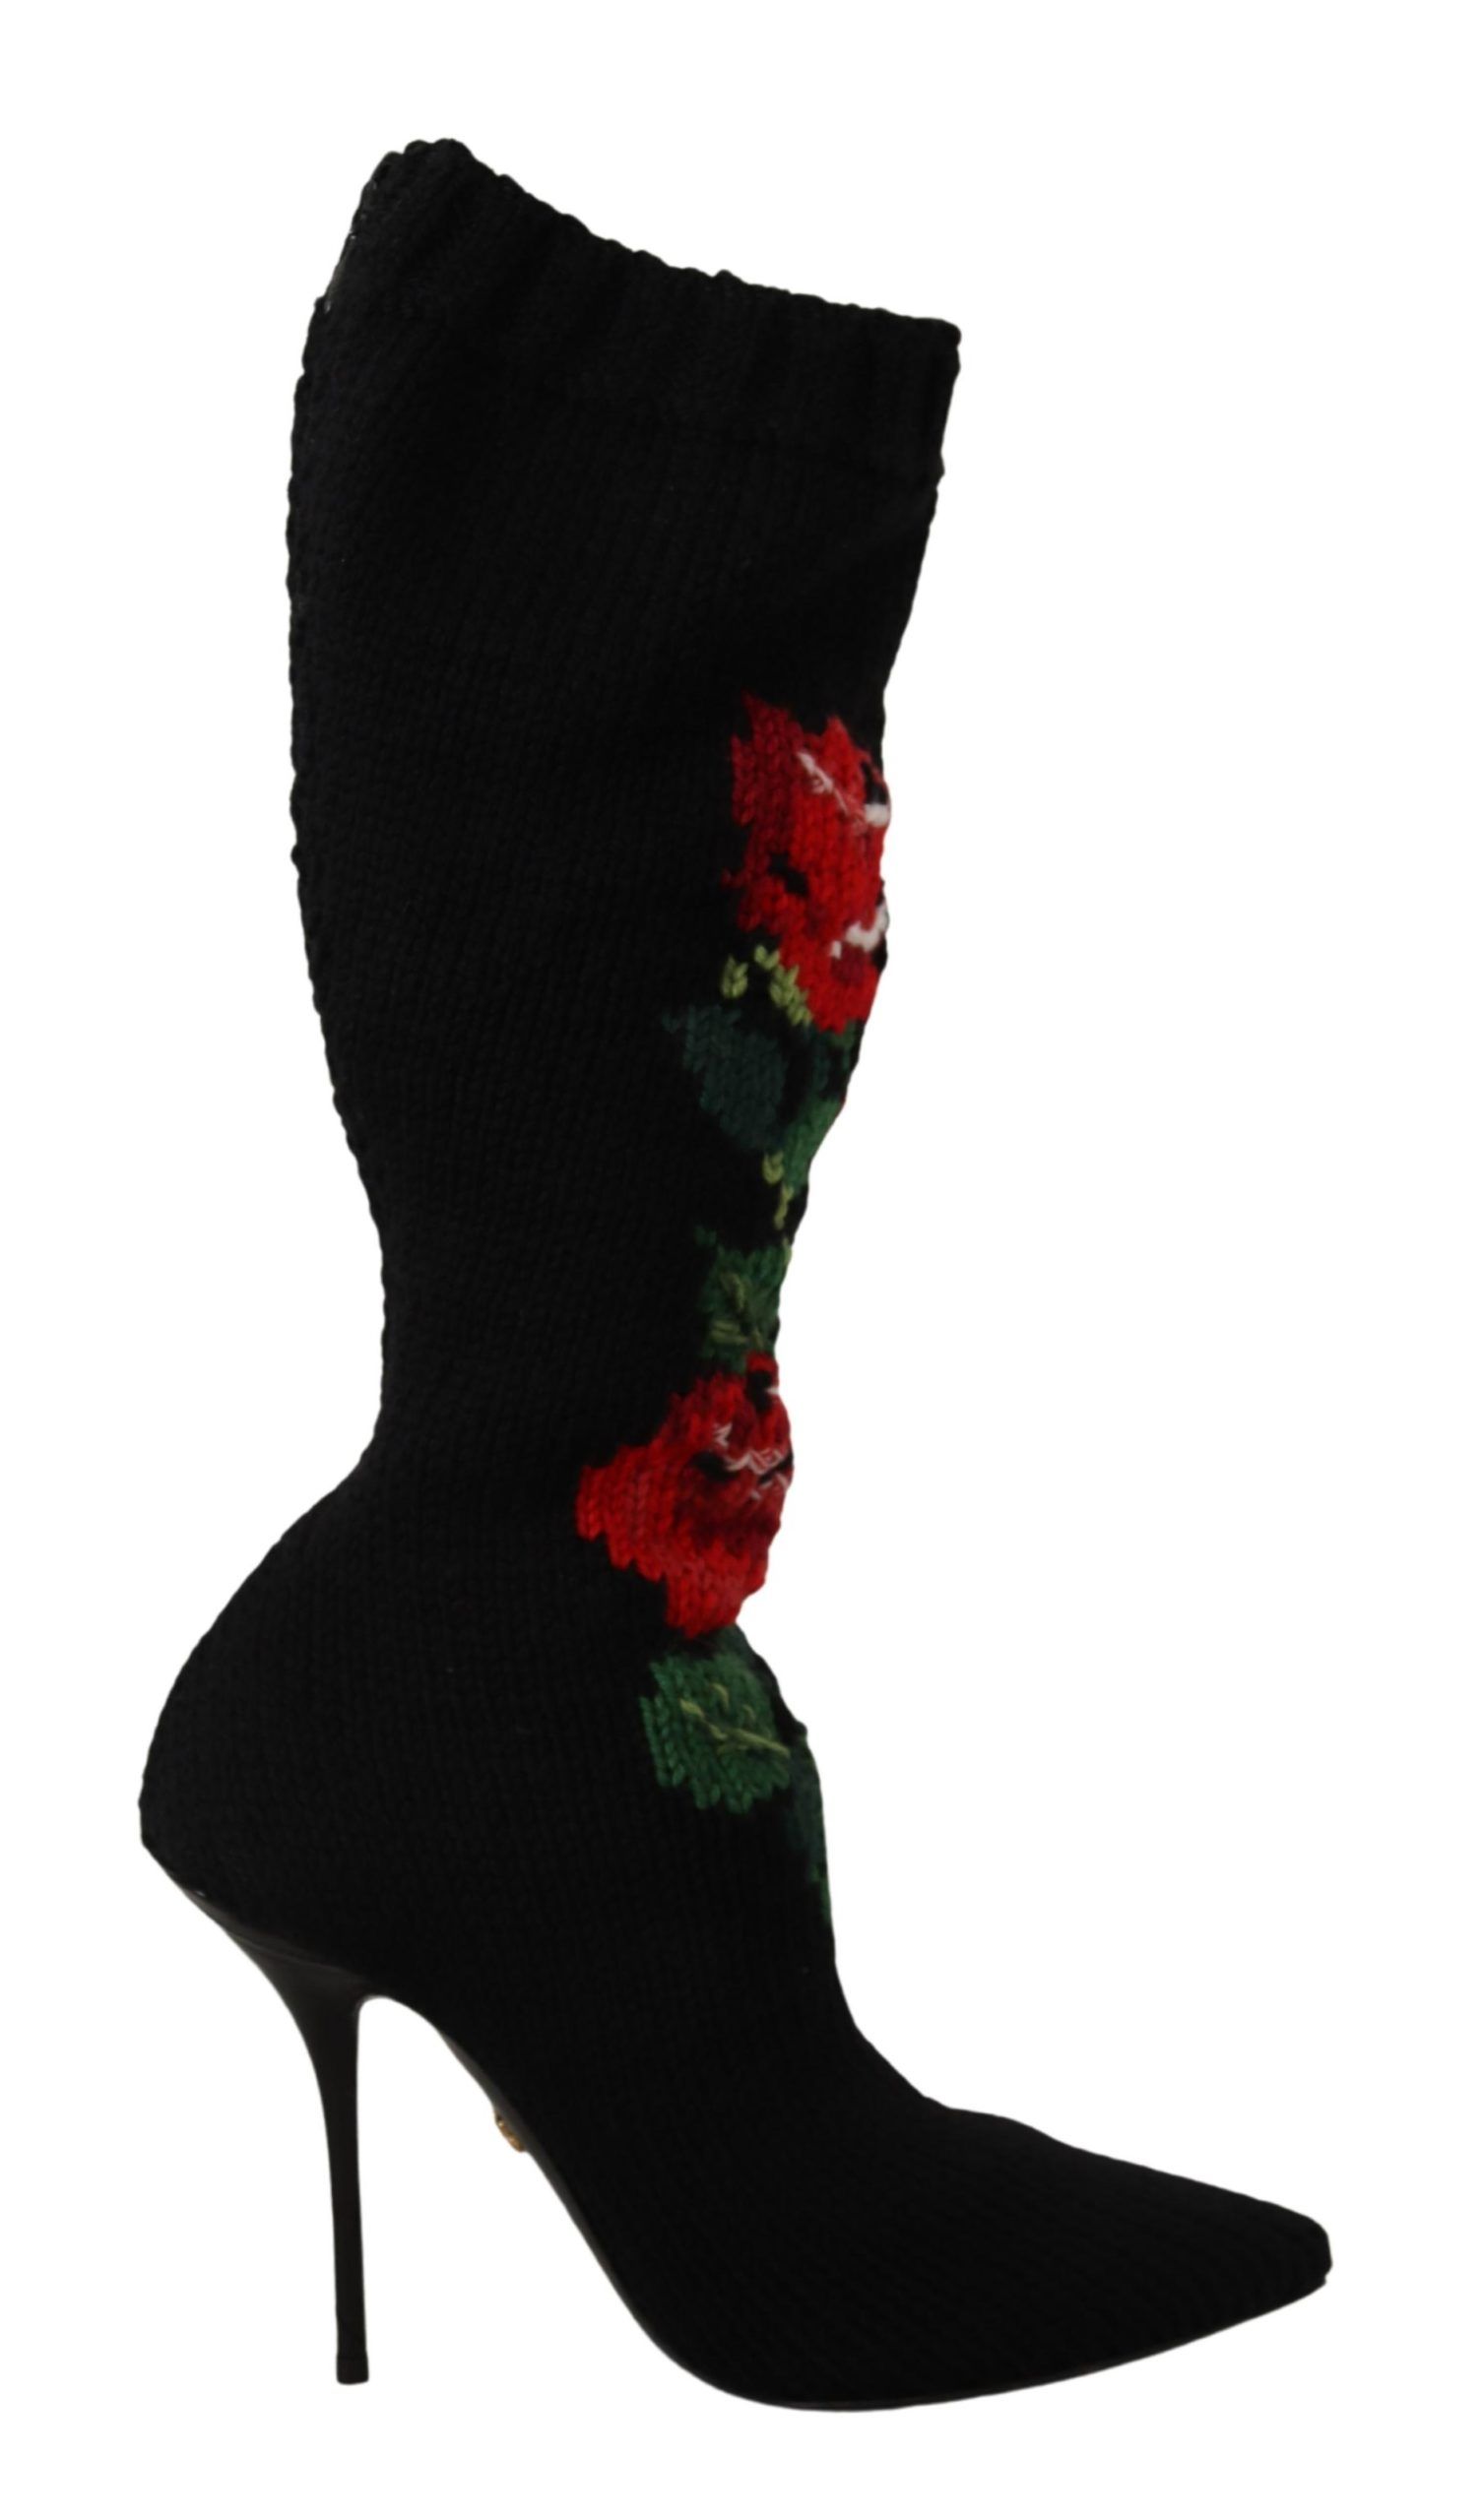 Black Dolce & Gabbana Black Stretch Socks Red Roses Booties Shoes